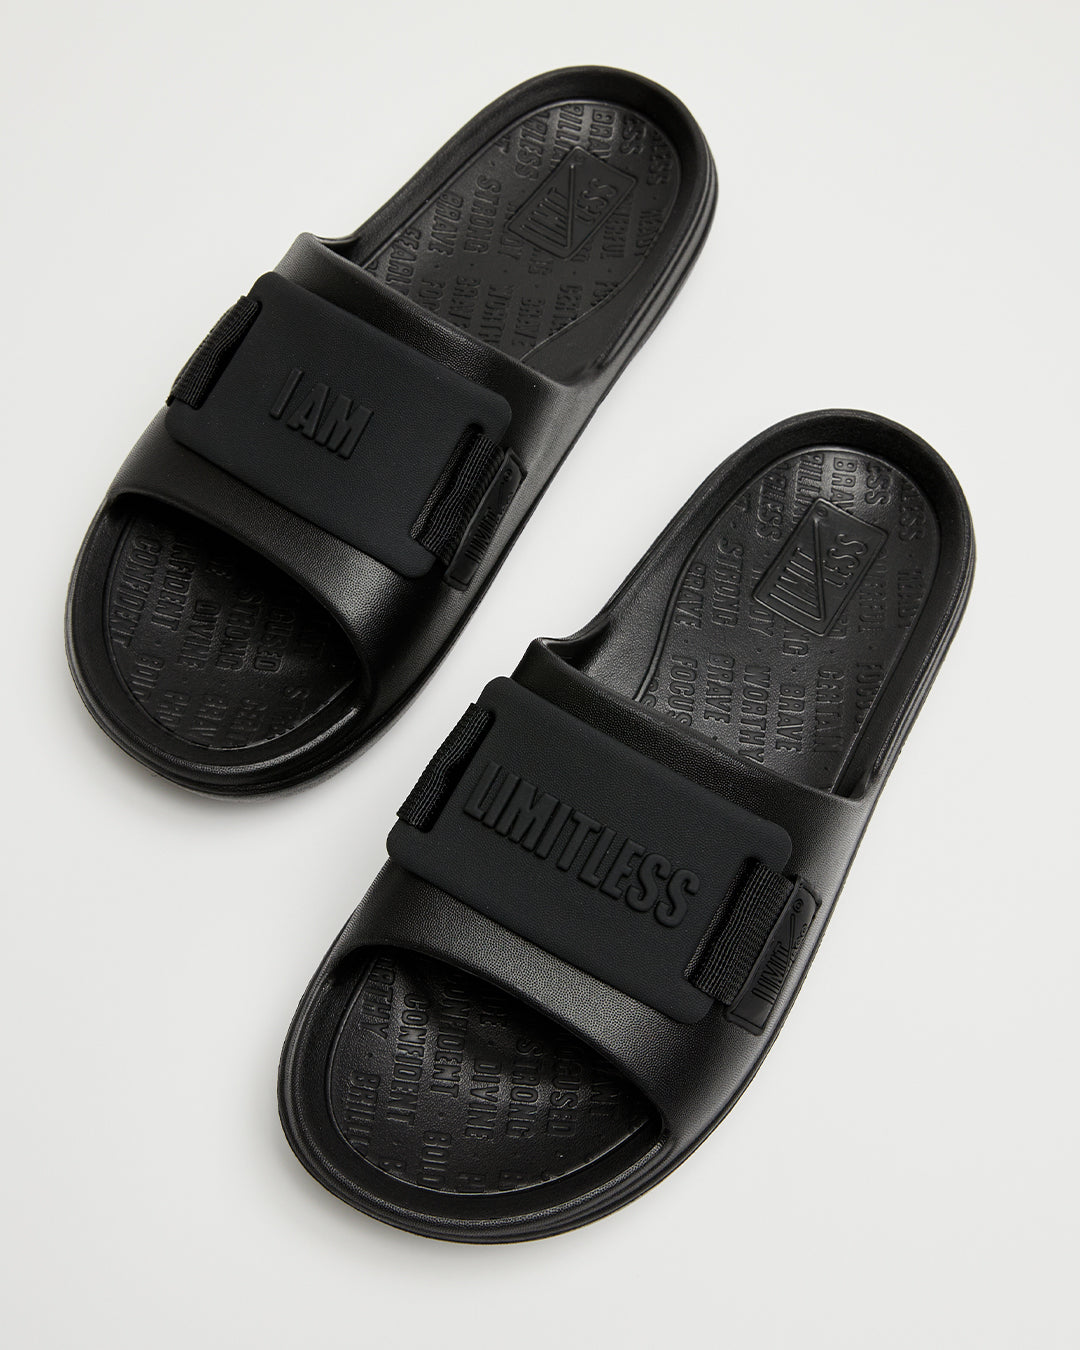 LIMITLESS SLIDES™ WITH ESSENTIAL TIBAH™ QUAD - CARDINAL GIBBONS HIGH SCHOOL EDITION